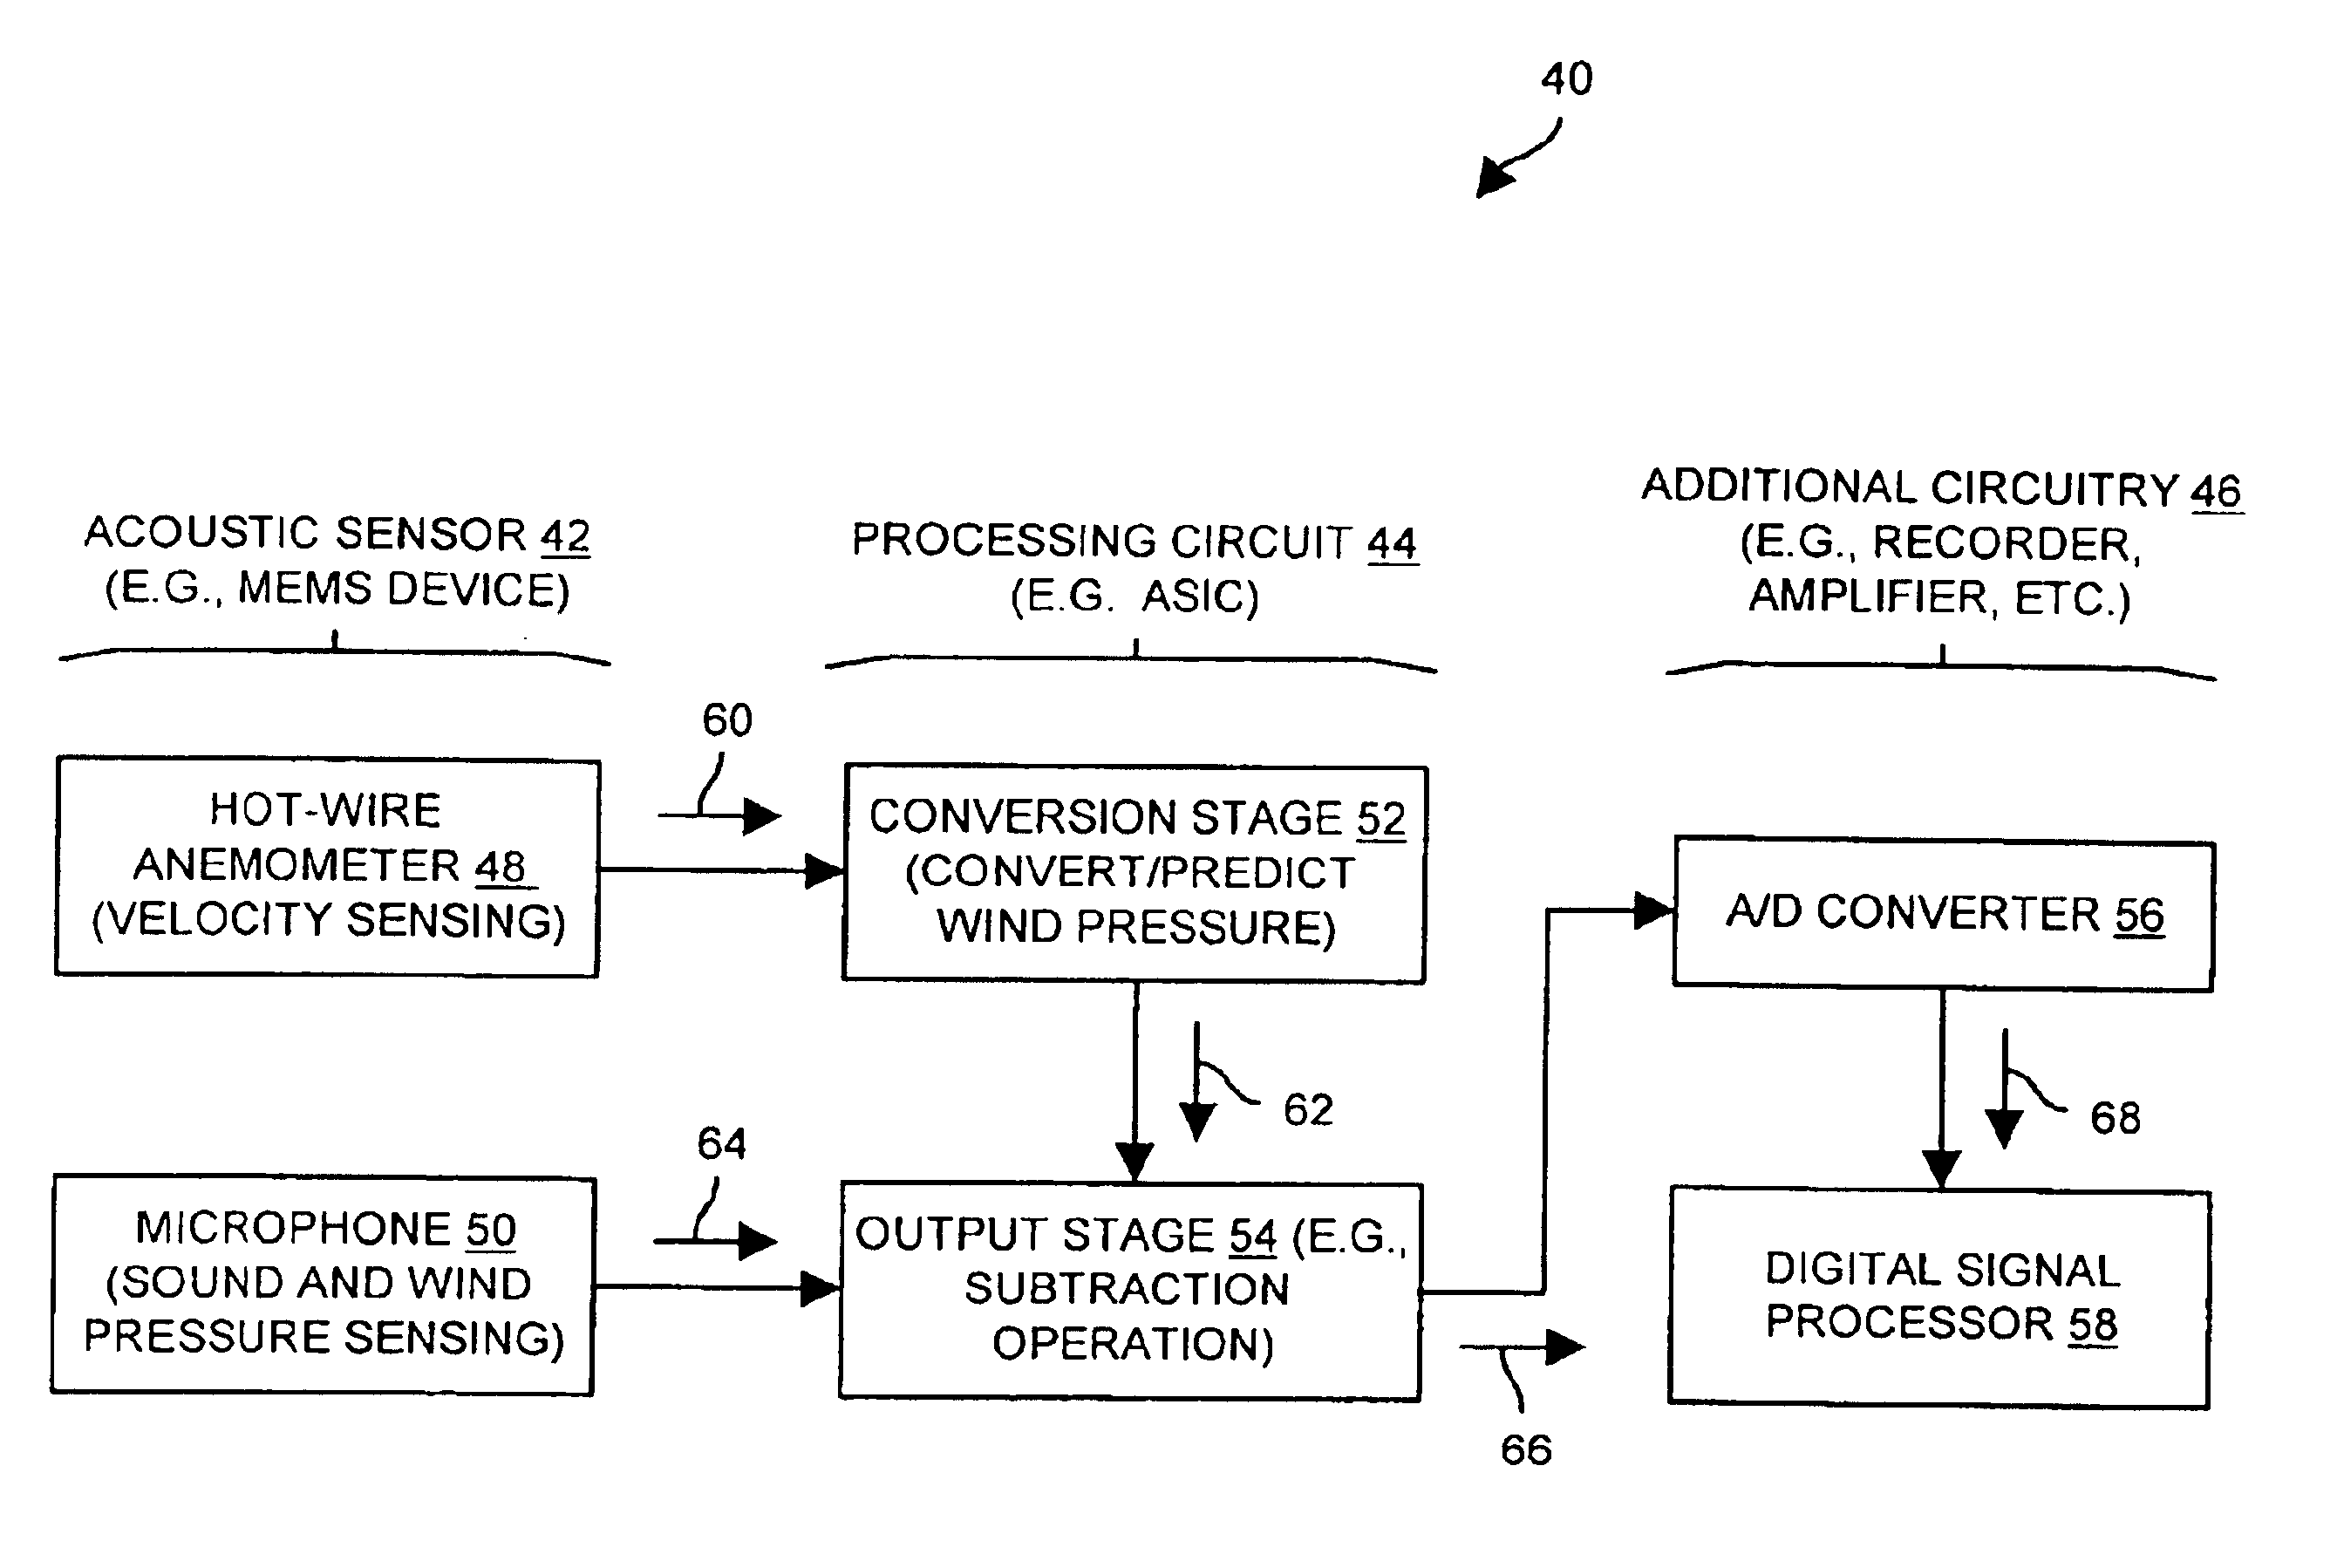 Systems and methods for sensing an acoustic signal using microelectromechanical systems technology